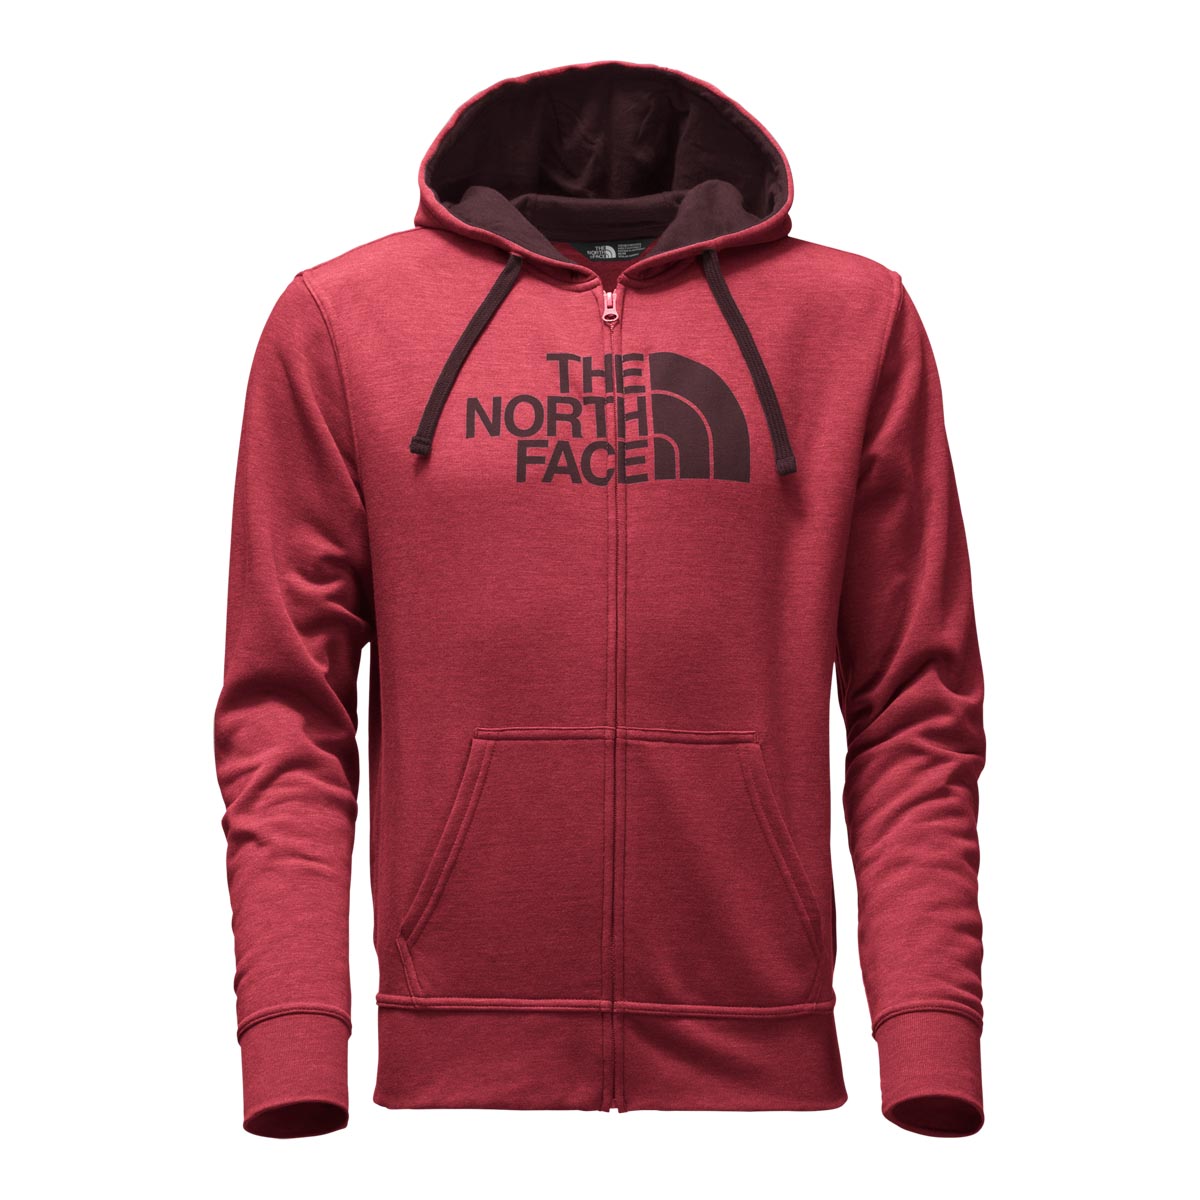 The North Face Mens Half Dome Full Zip Hoodie Discontinued Pricing